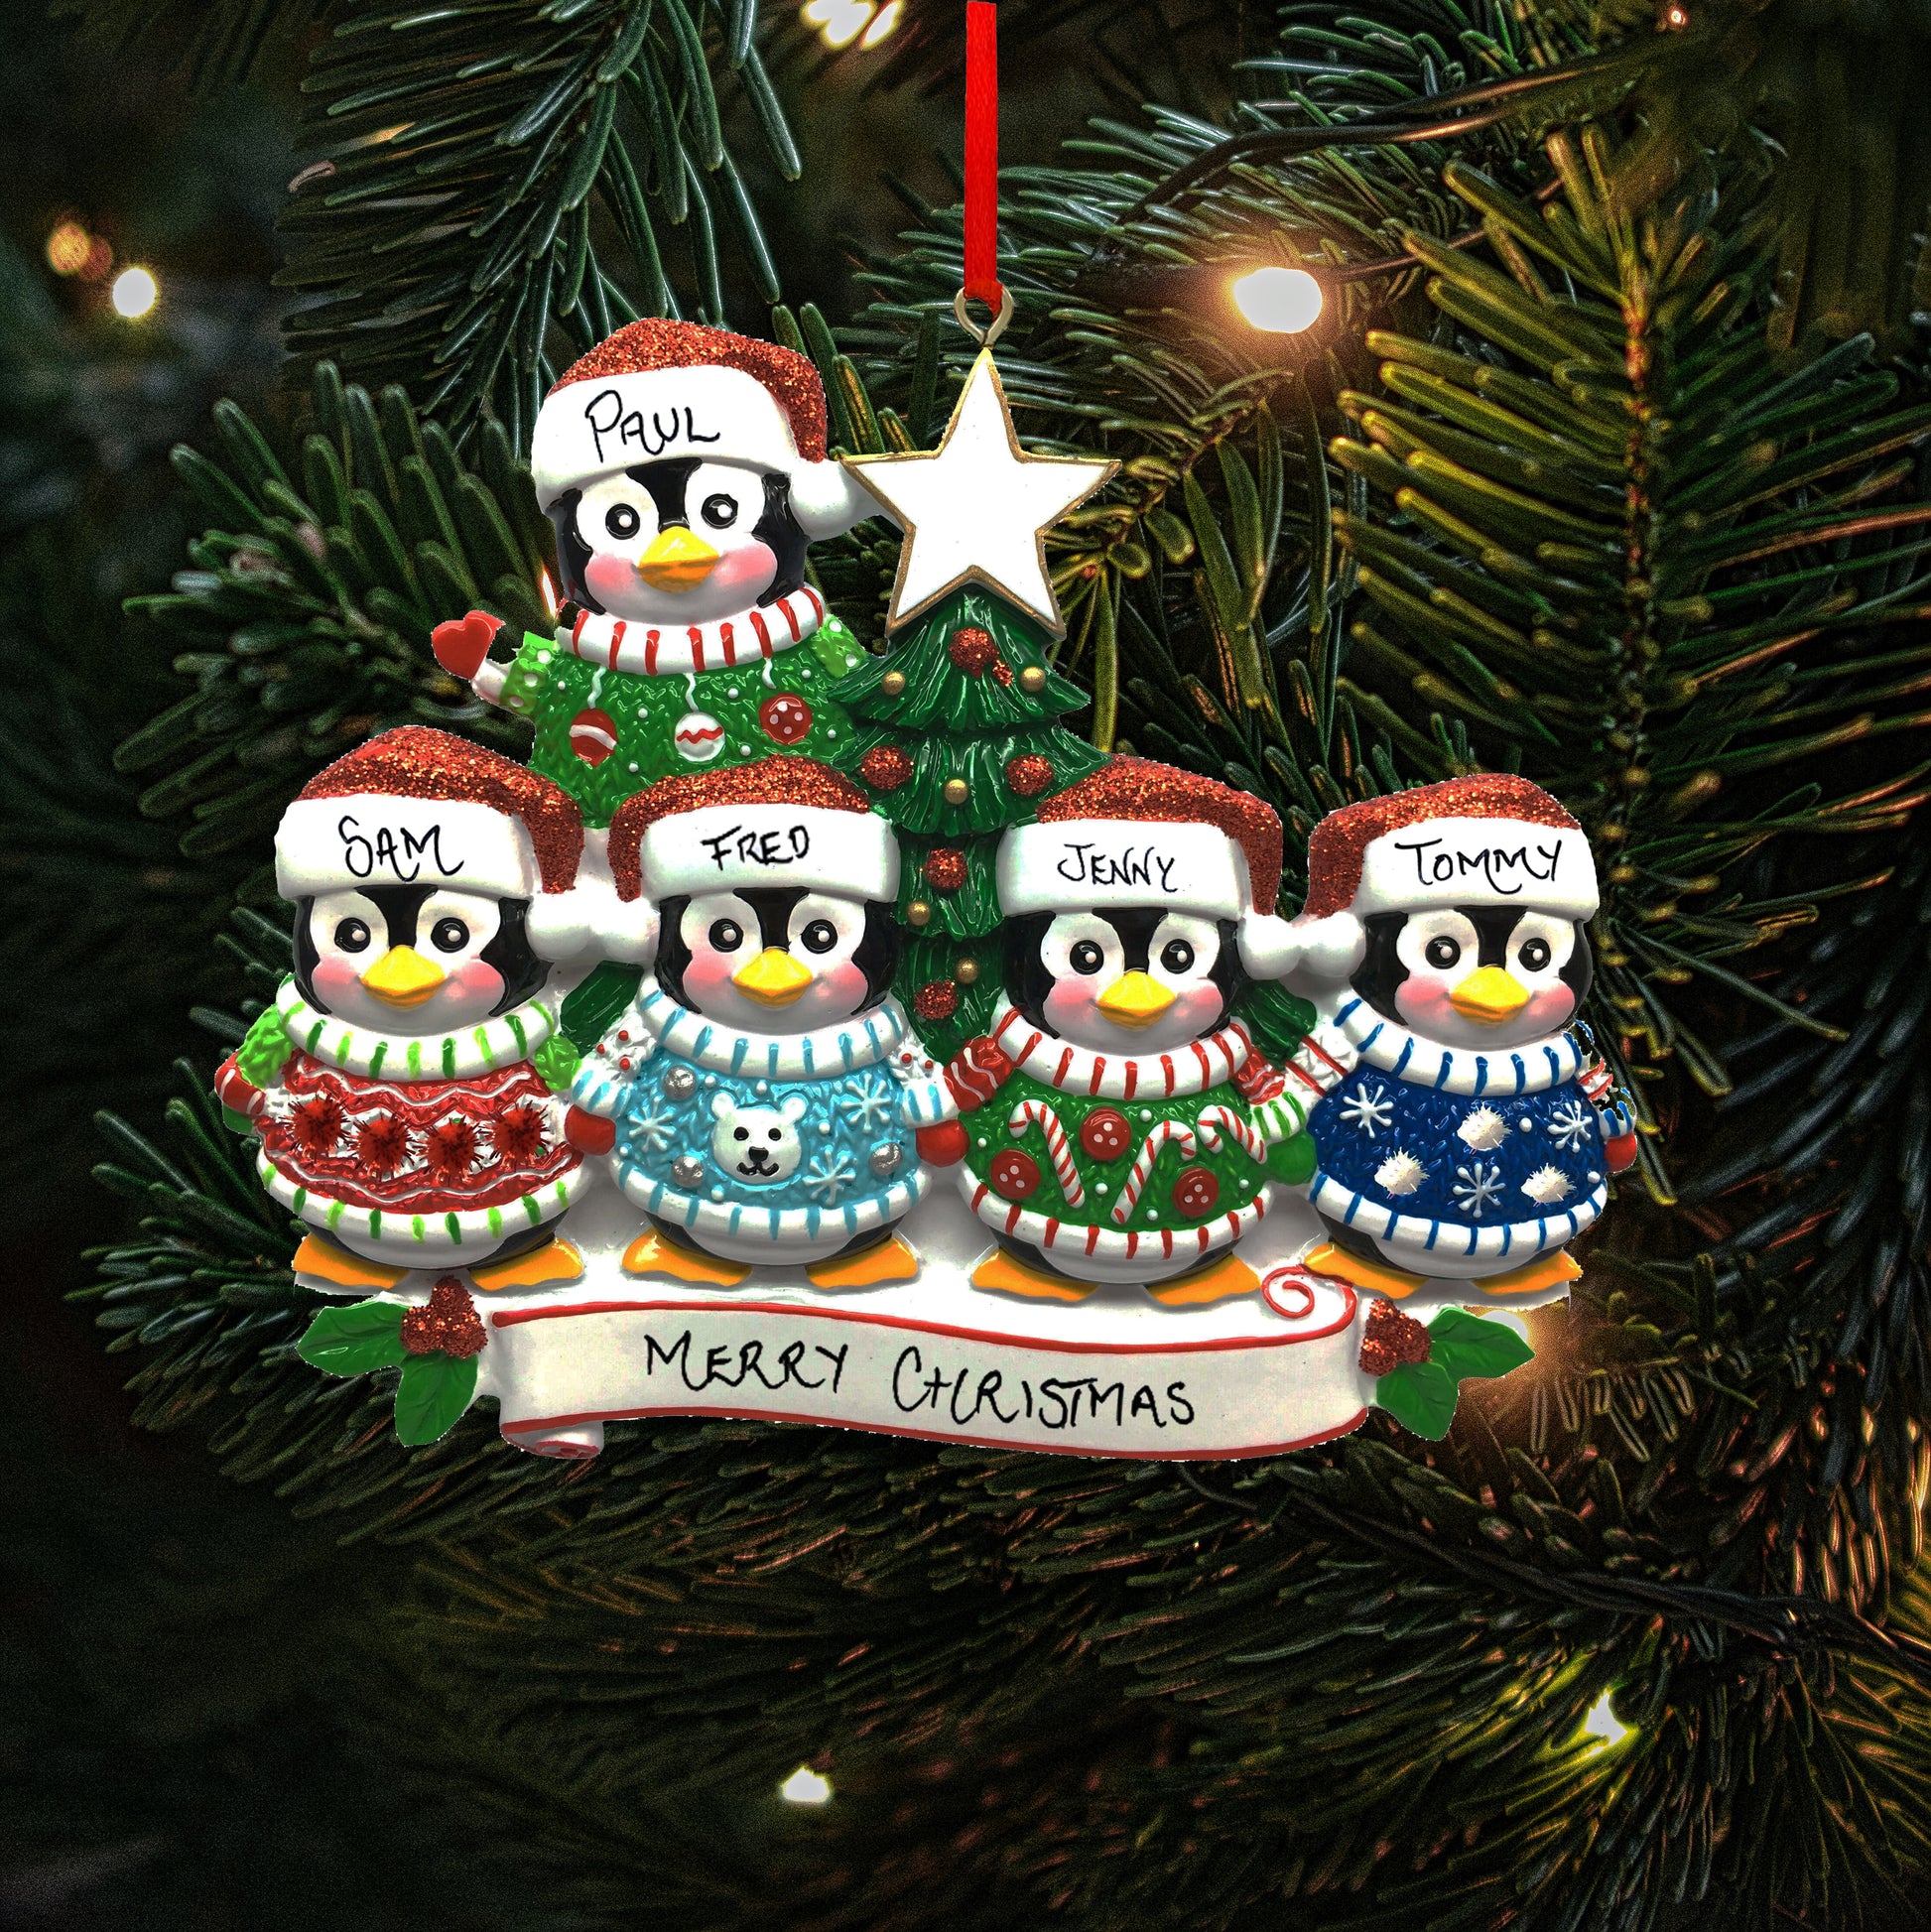 A personalized family of five Christmas decoration featuring five penguins with the names 'Sam', 'Paul', 'Fred', 'Jenny' and 'Tommy' written on their hats, showing the personalisable capabilities of the ornament. They are perched above a banner reading 'Merry Christmas.' The decoration hangs on a Christmas tree, with lights in the background.